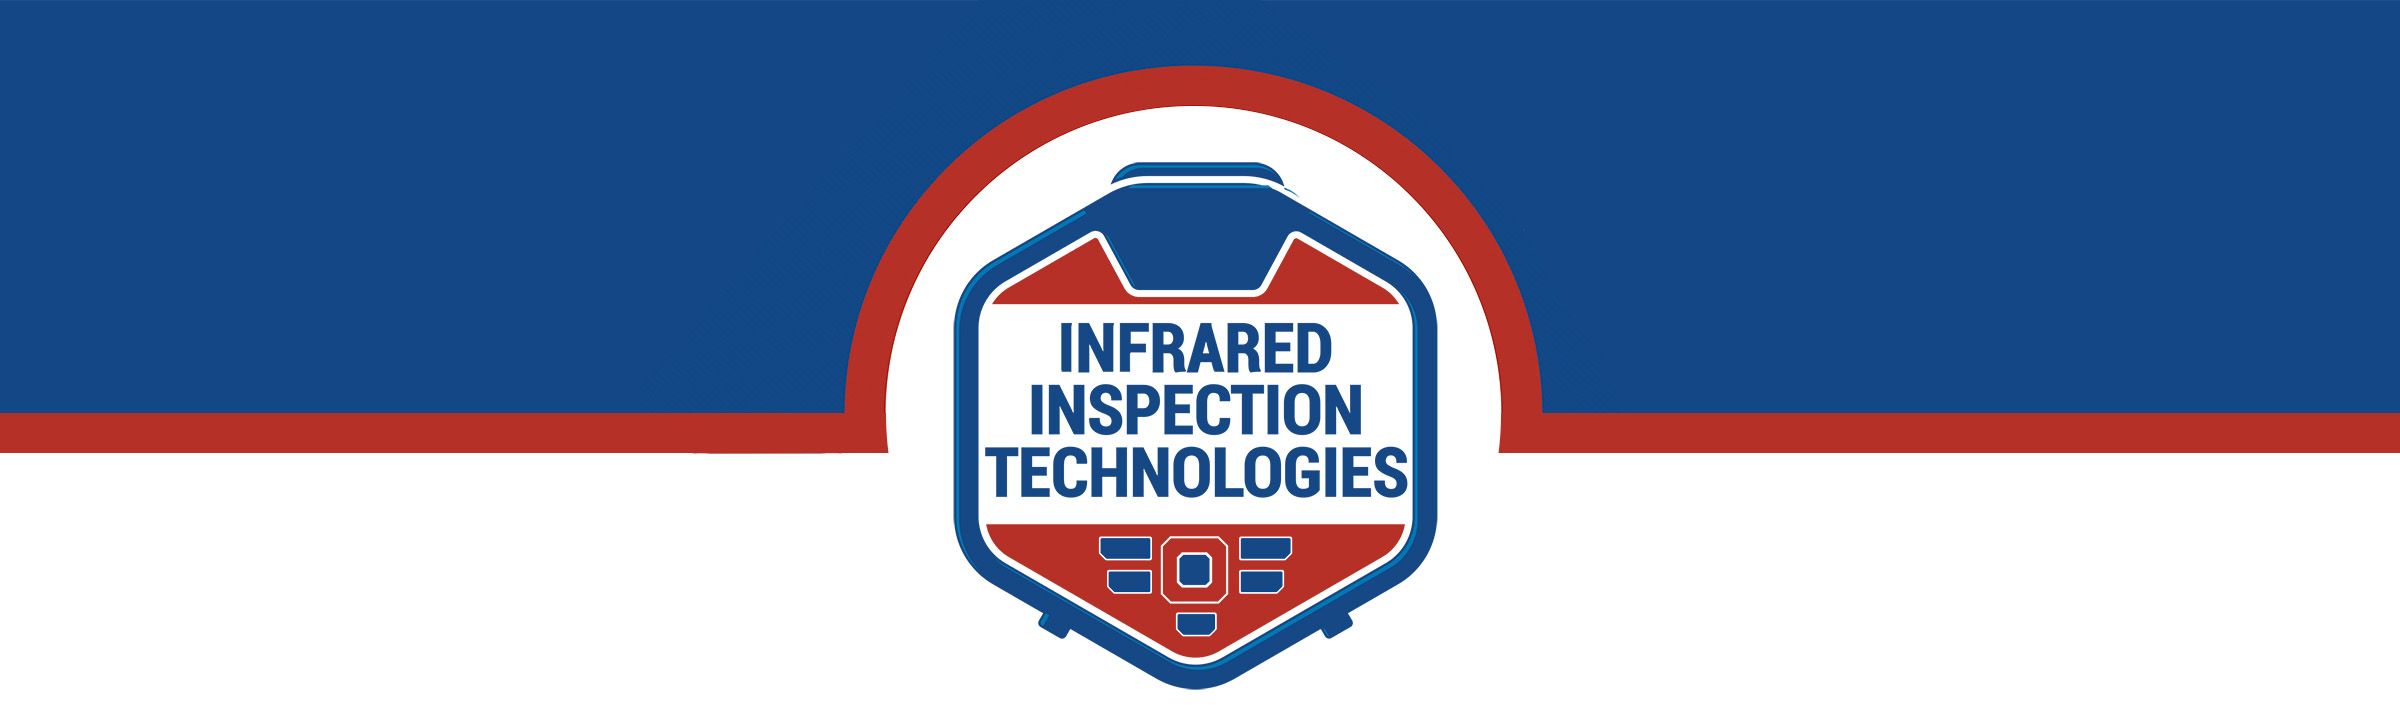 Infrared Inspection Technologies